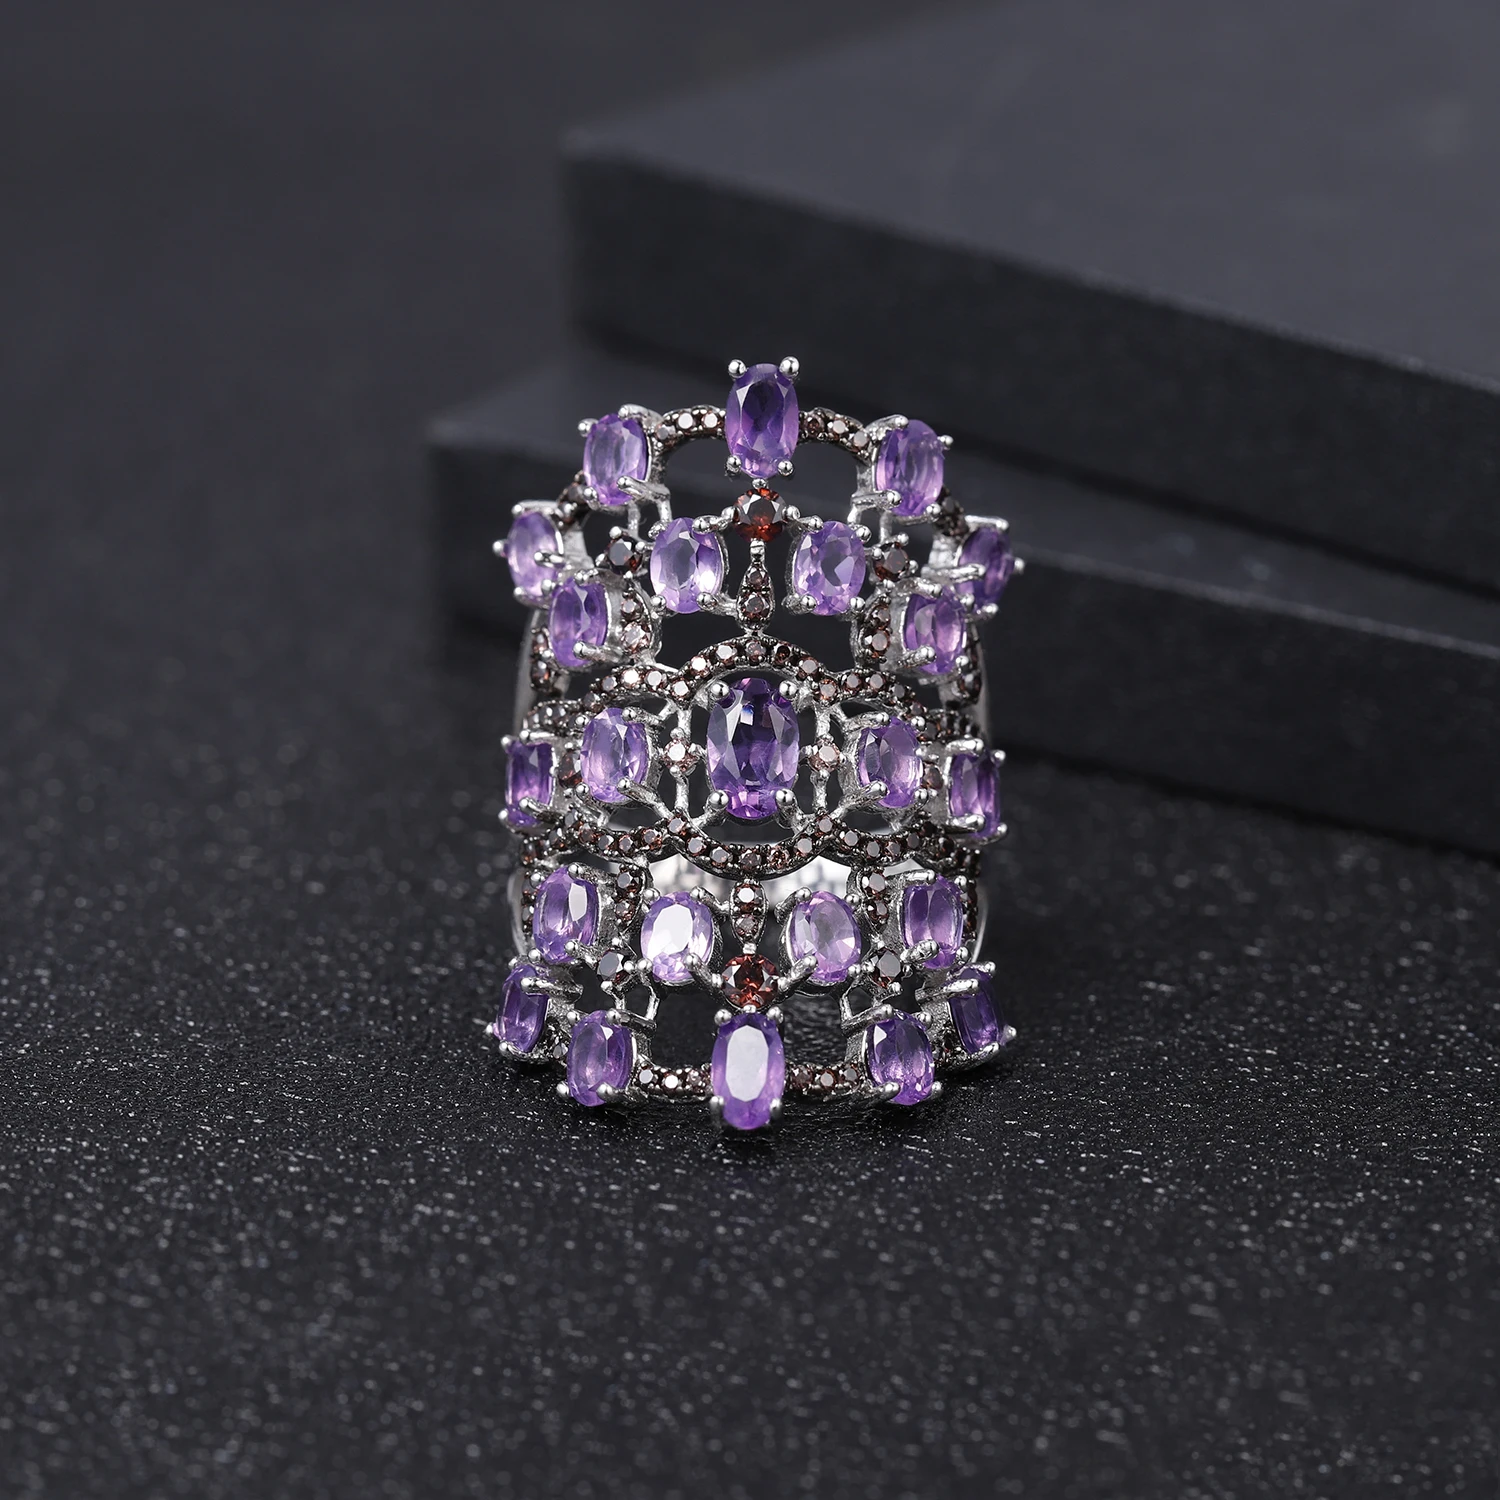 T luxury 7 44ct natural amethyst finger rings 925 sterling silver gemstone vintage ring thumb200